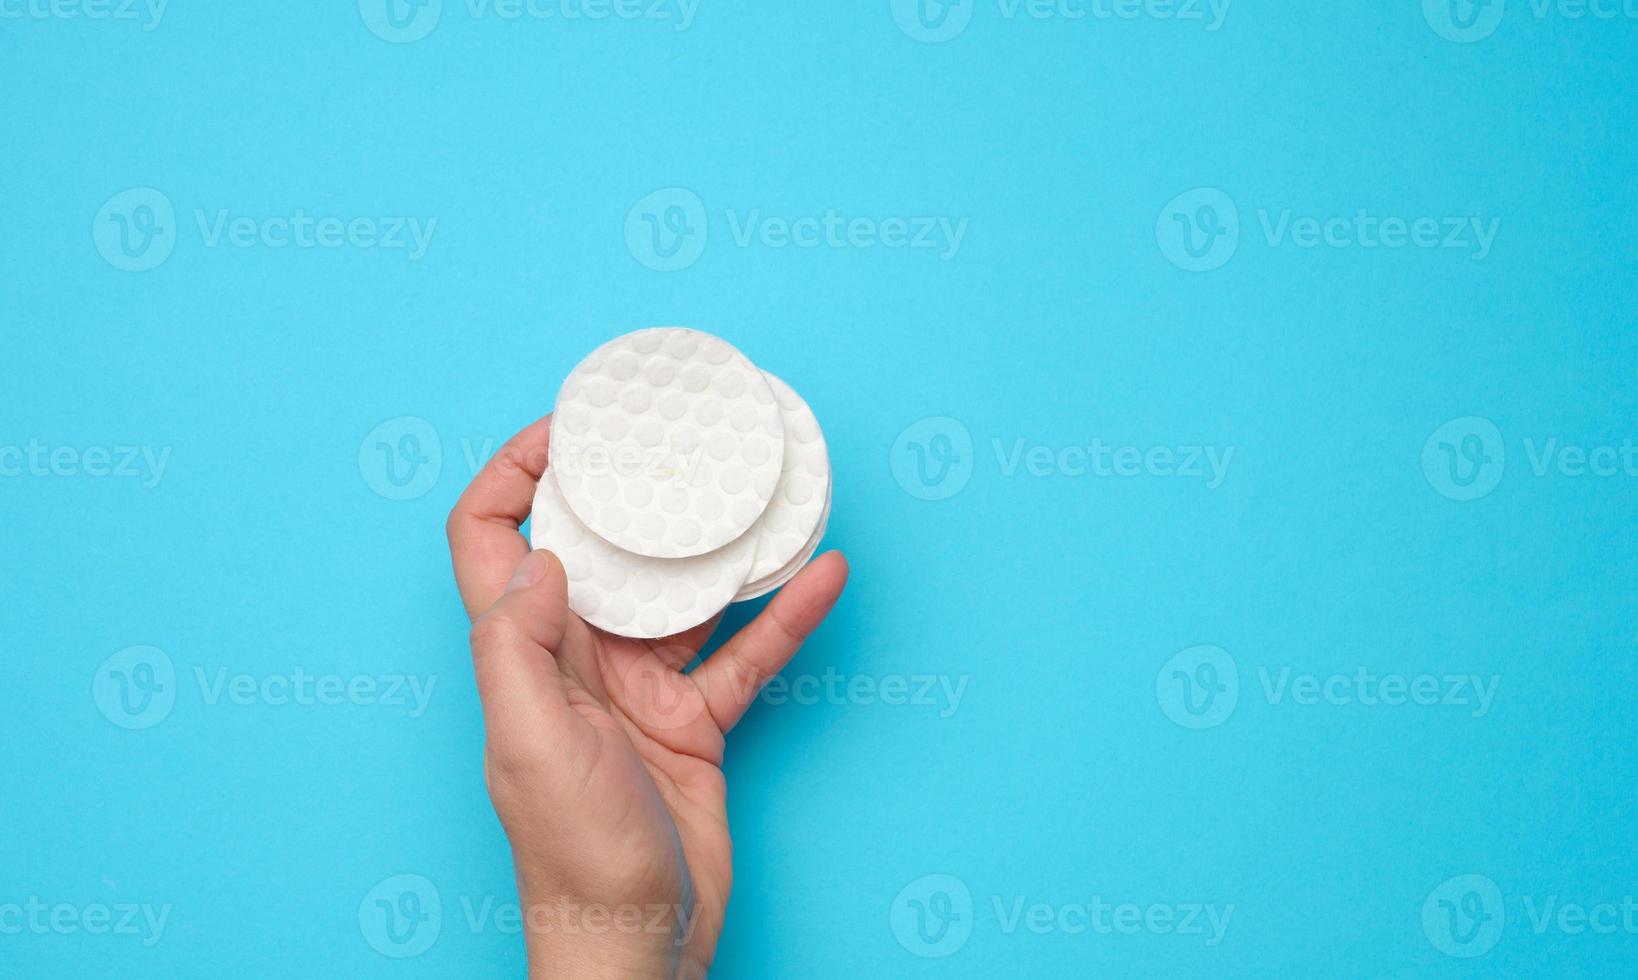 female hand holding clean round white cotton makeup remover pads on blue background photo